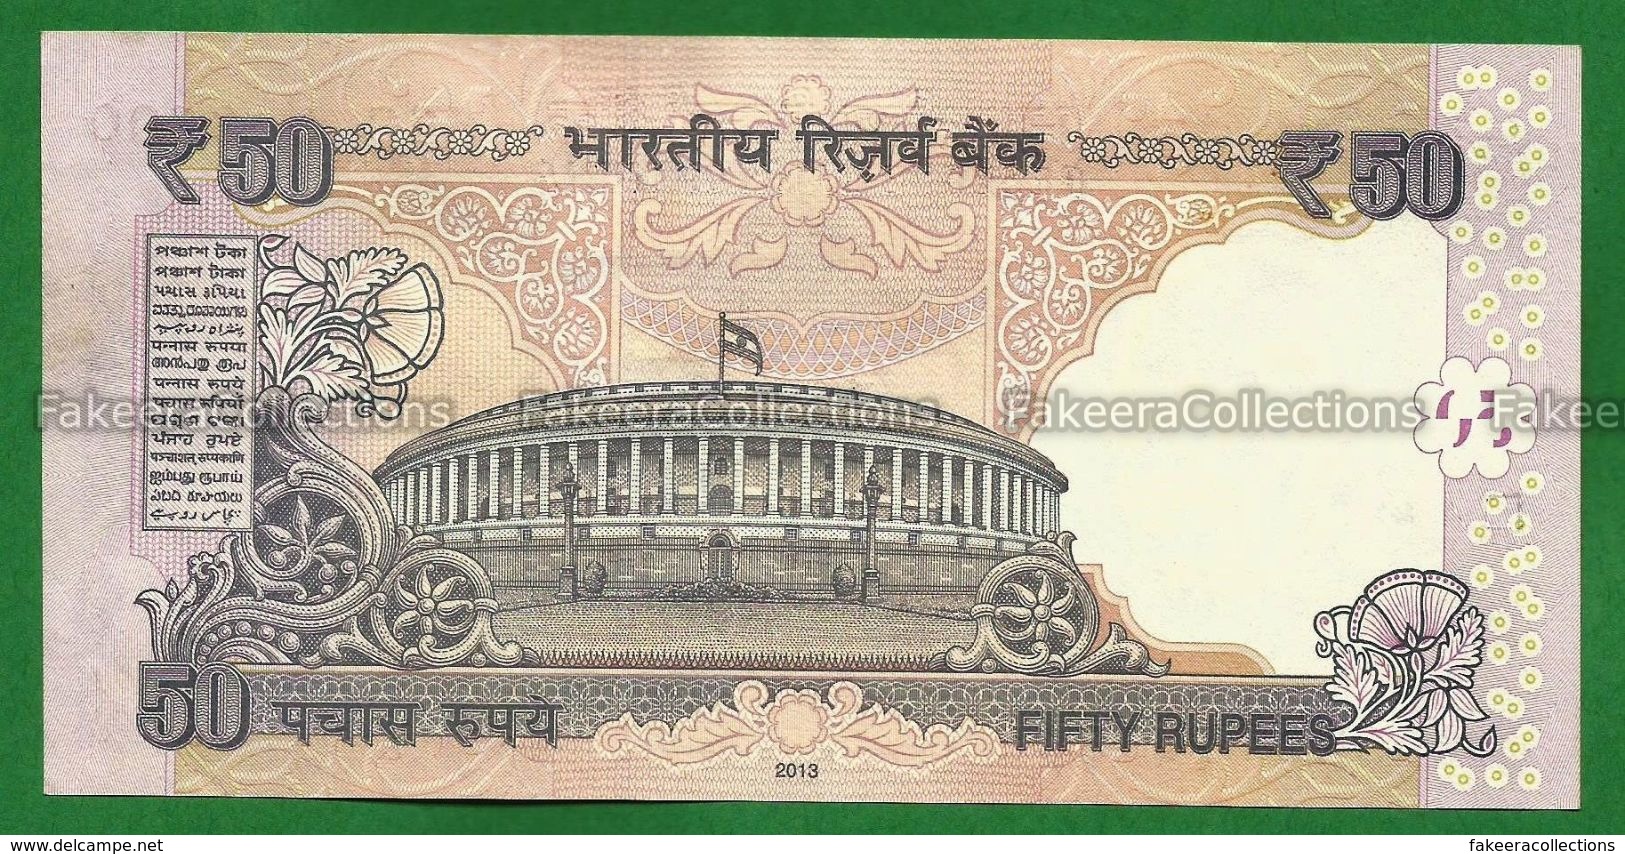 India Inde Indien - 50 Rupees / INR Banknote P-104b(1) - 2013 UNC (Without Letter) D. Subbarao - As Scan - Indien